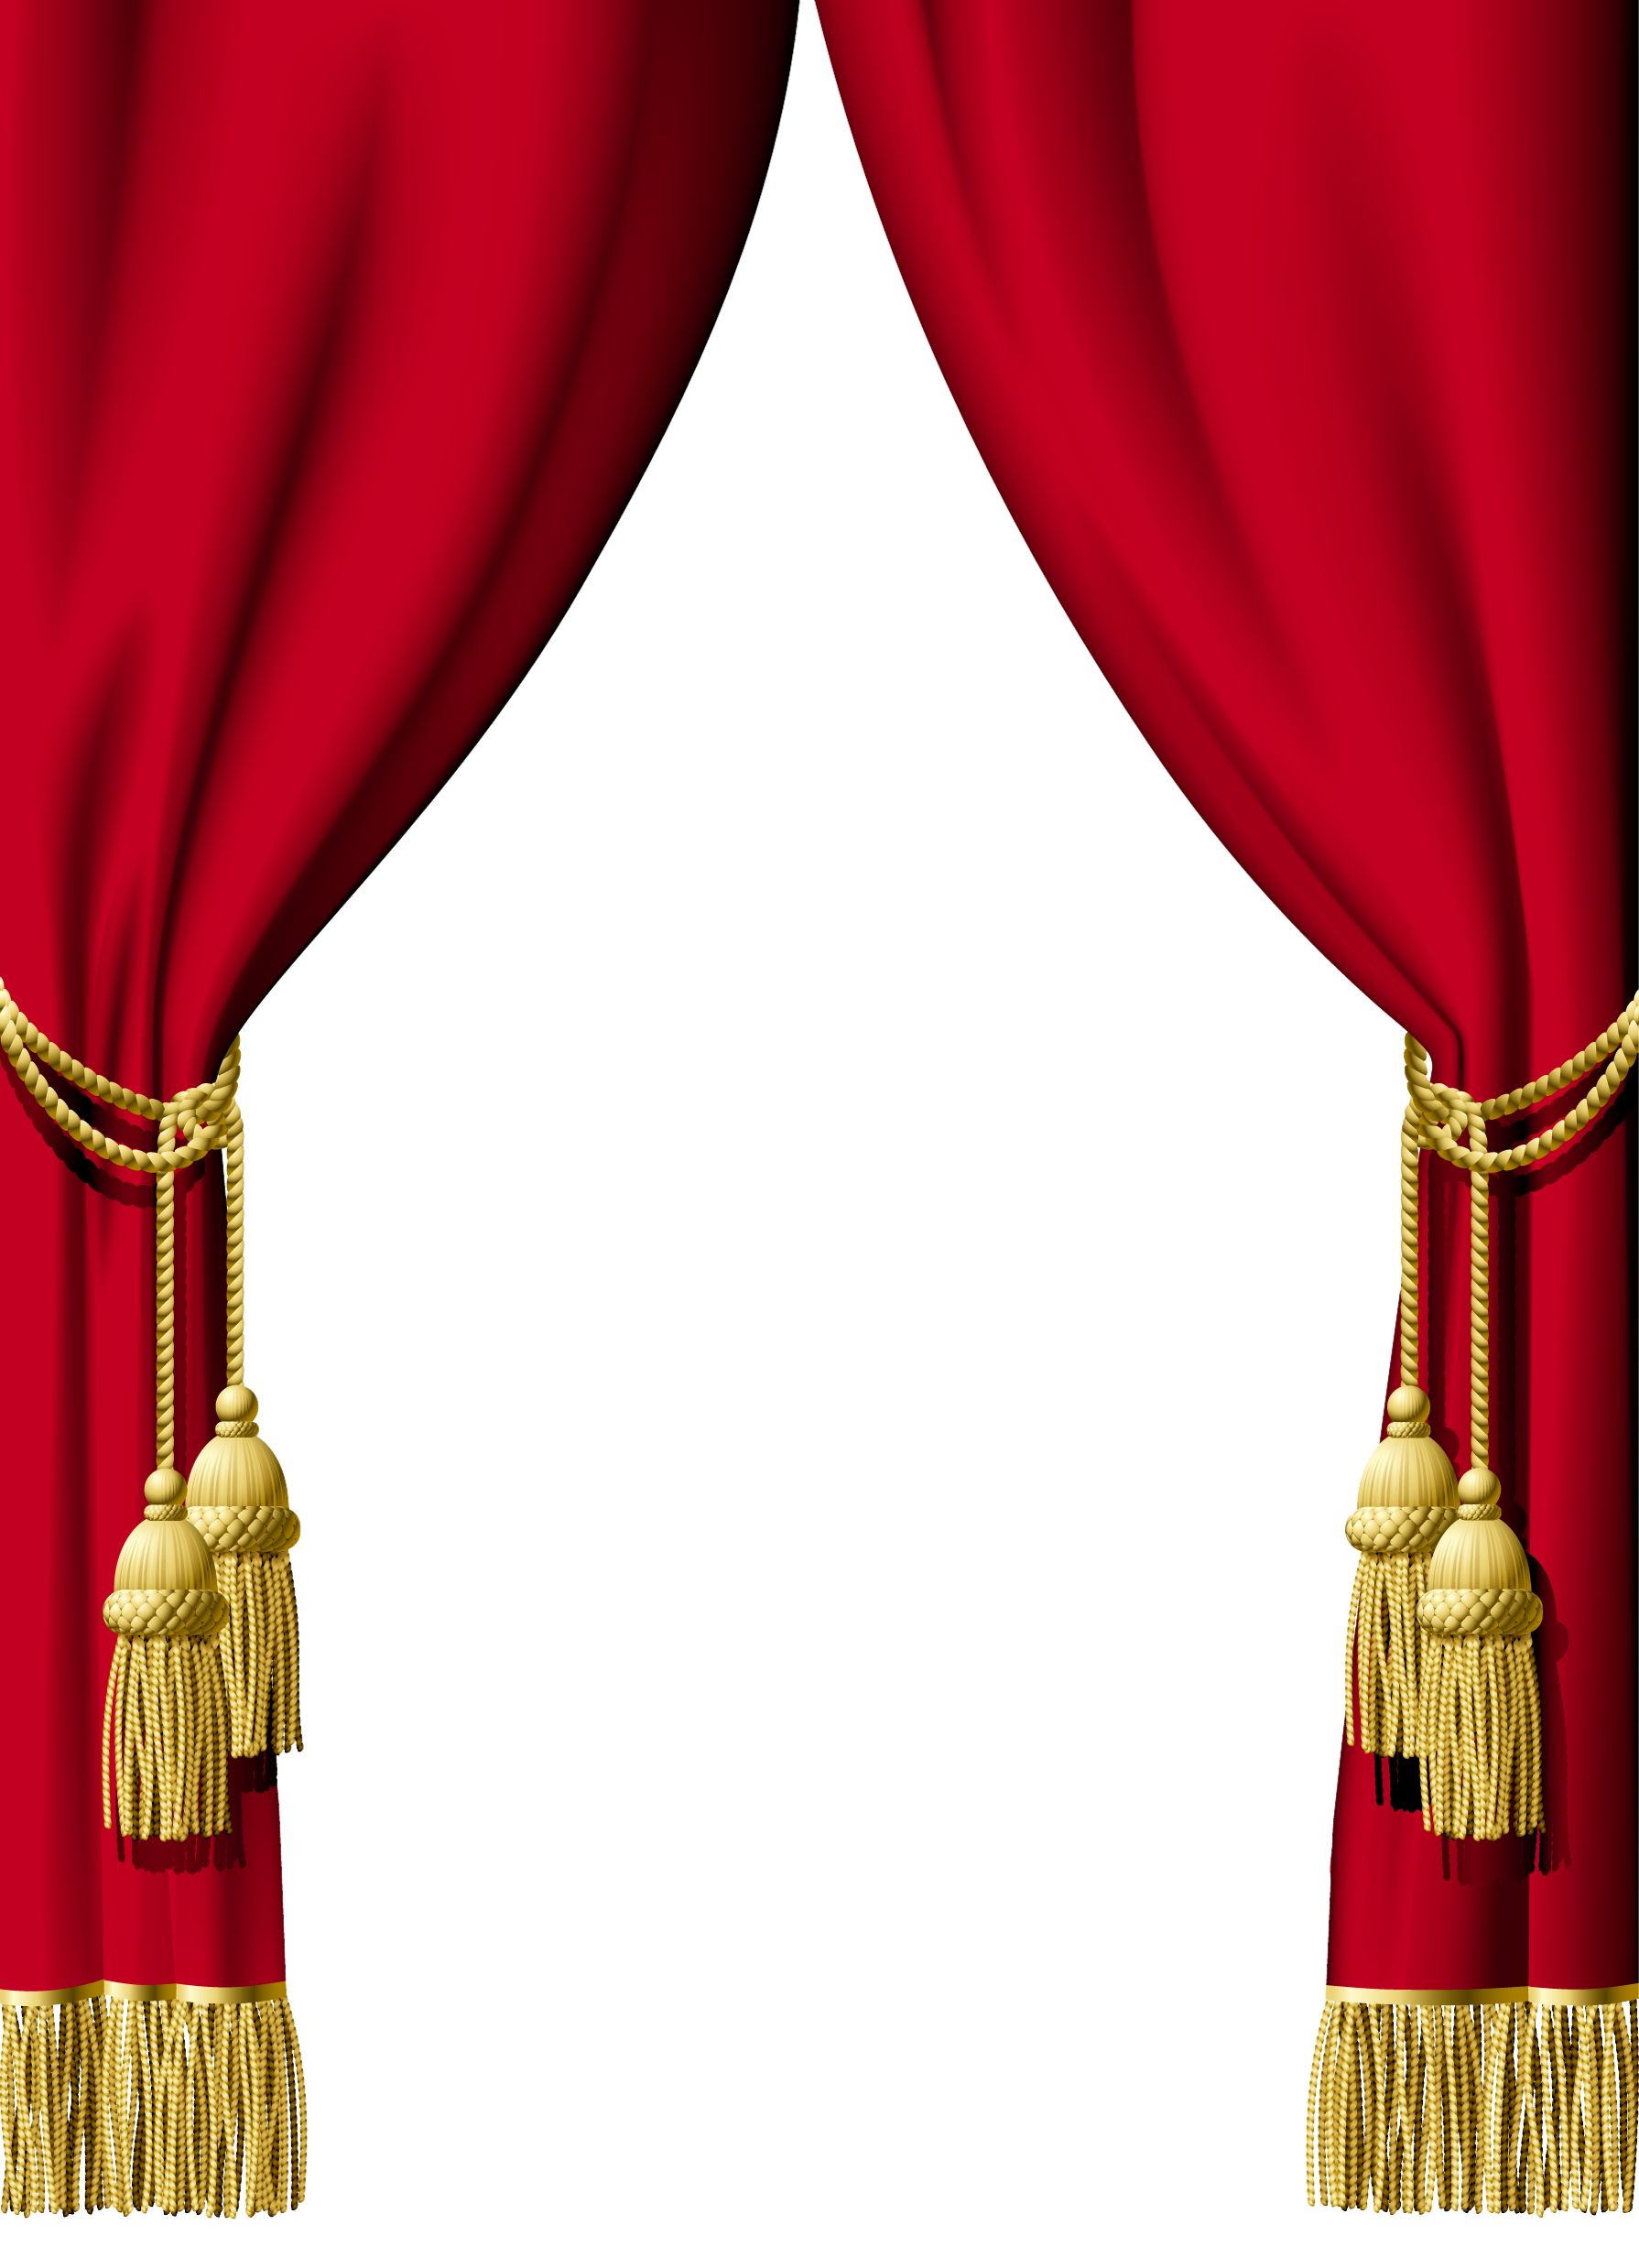 Red curtain decoration.